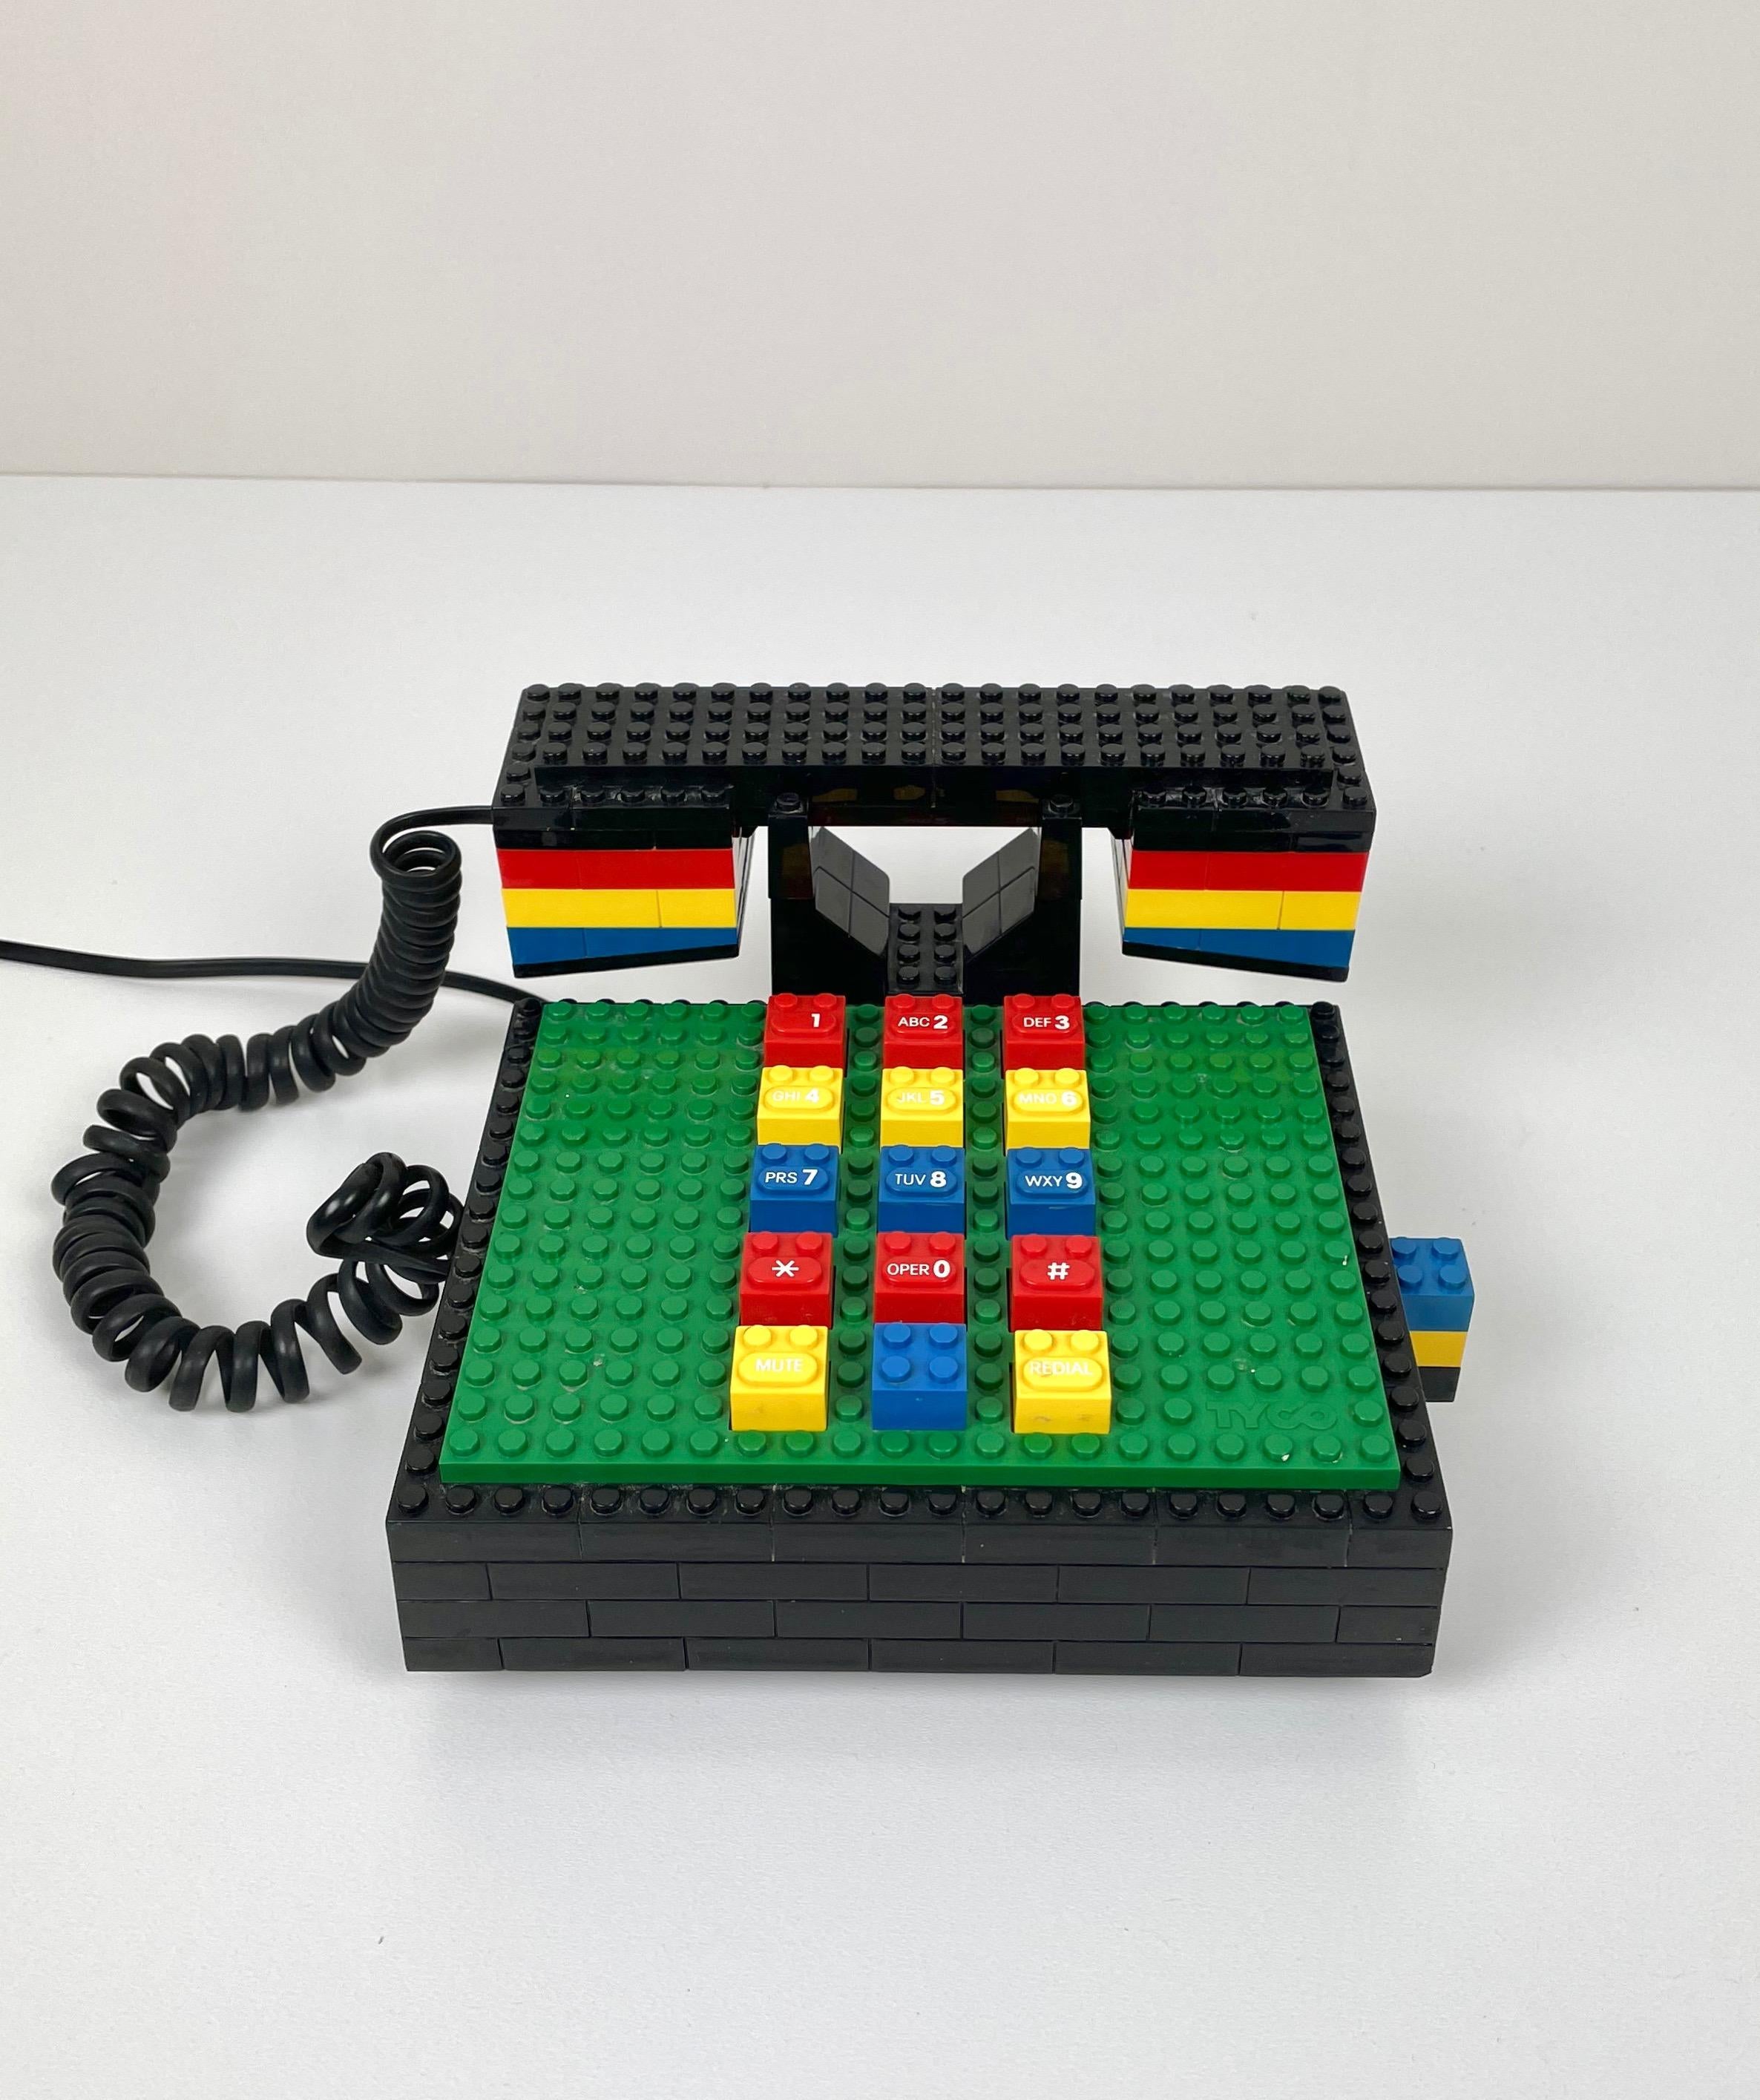 1990s telephone made of LEGO by Tyco.